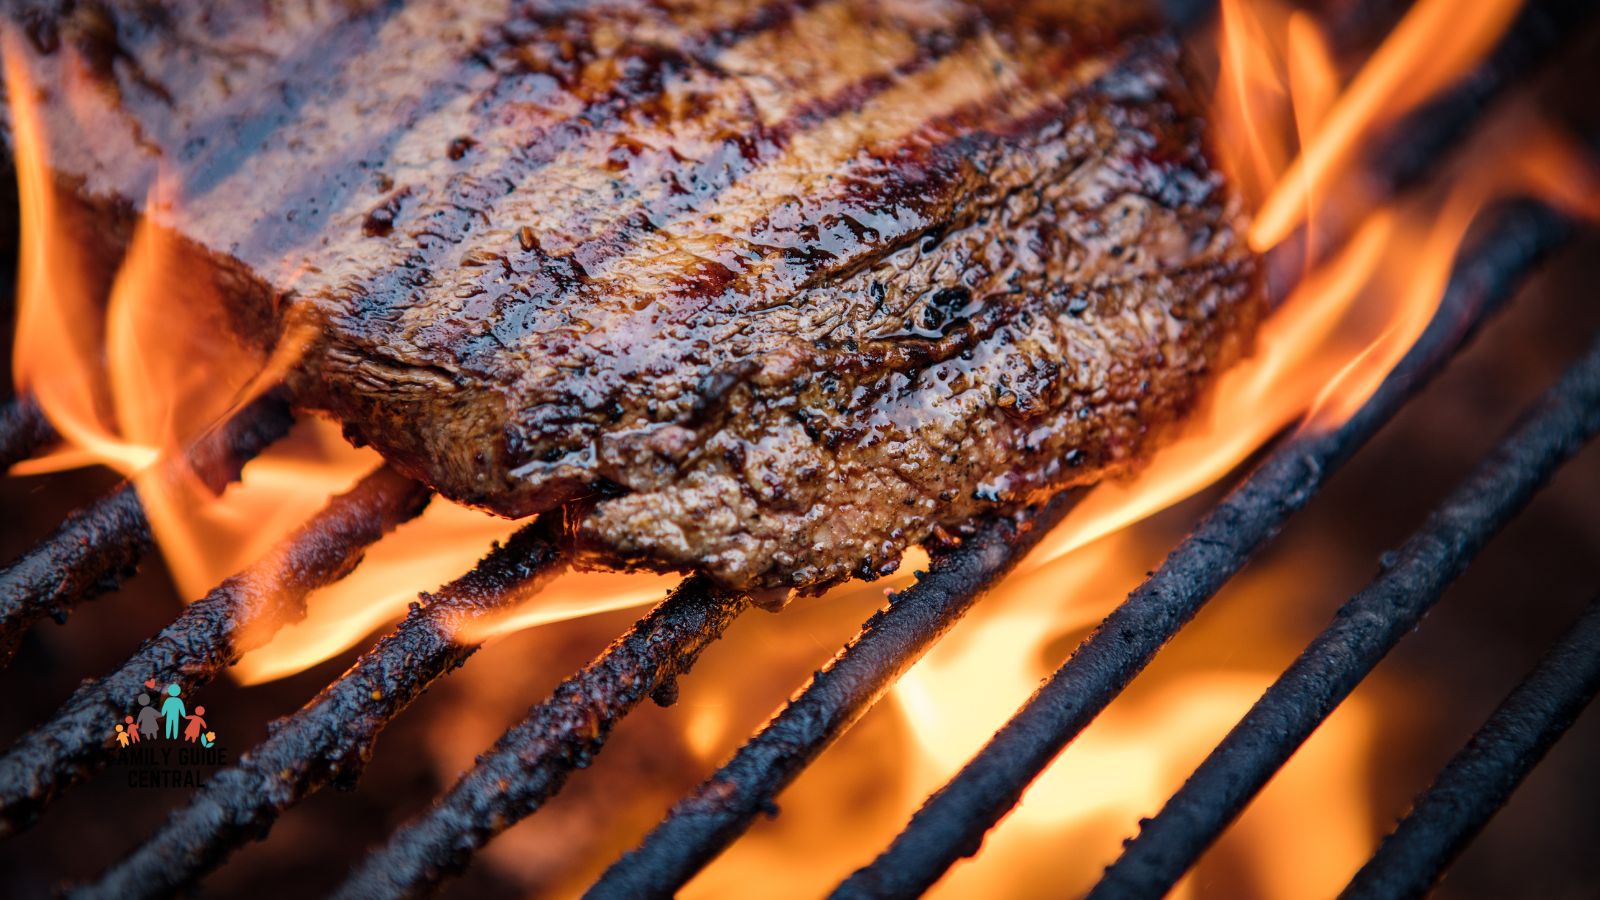 Grill marks on steak using a pellet grill - familyguidecentral.com